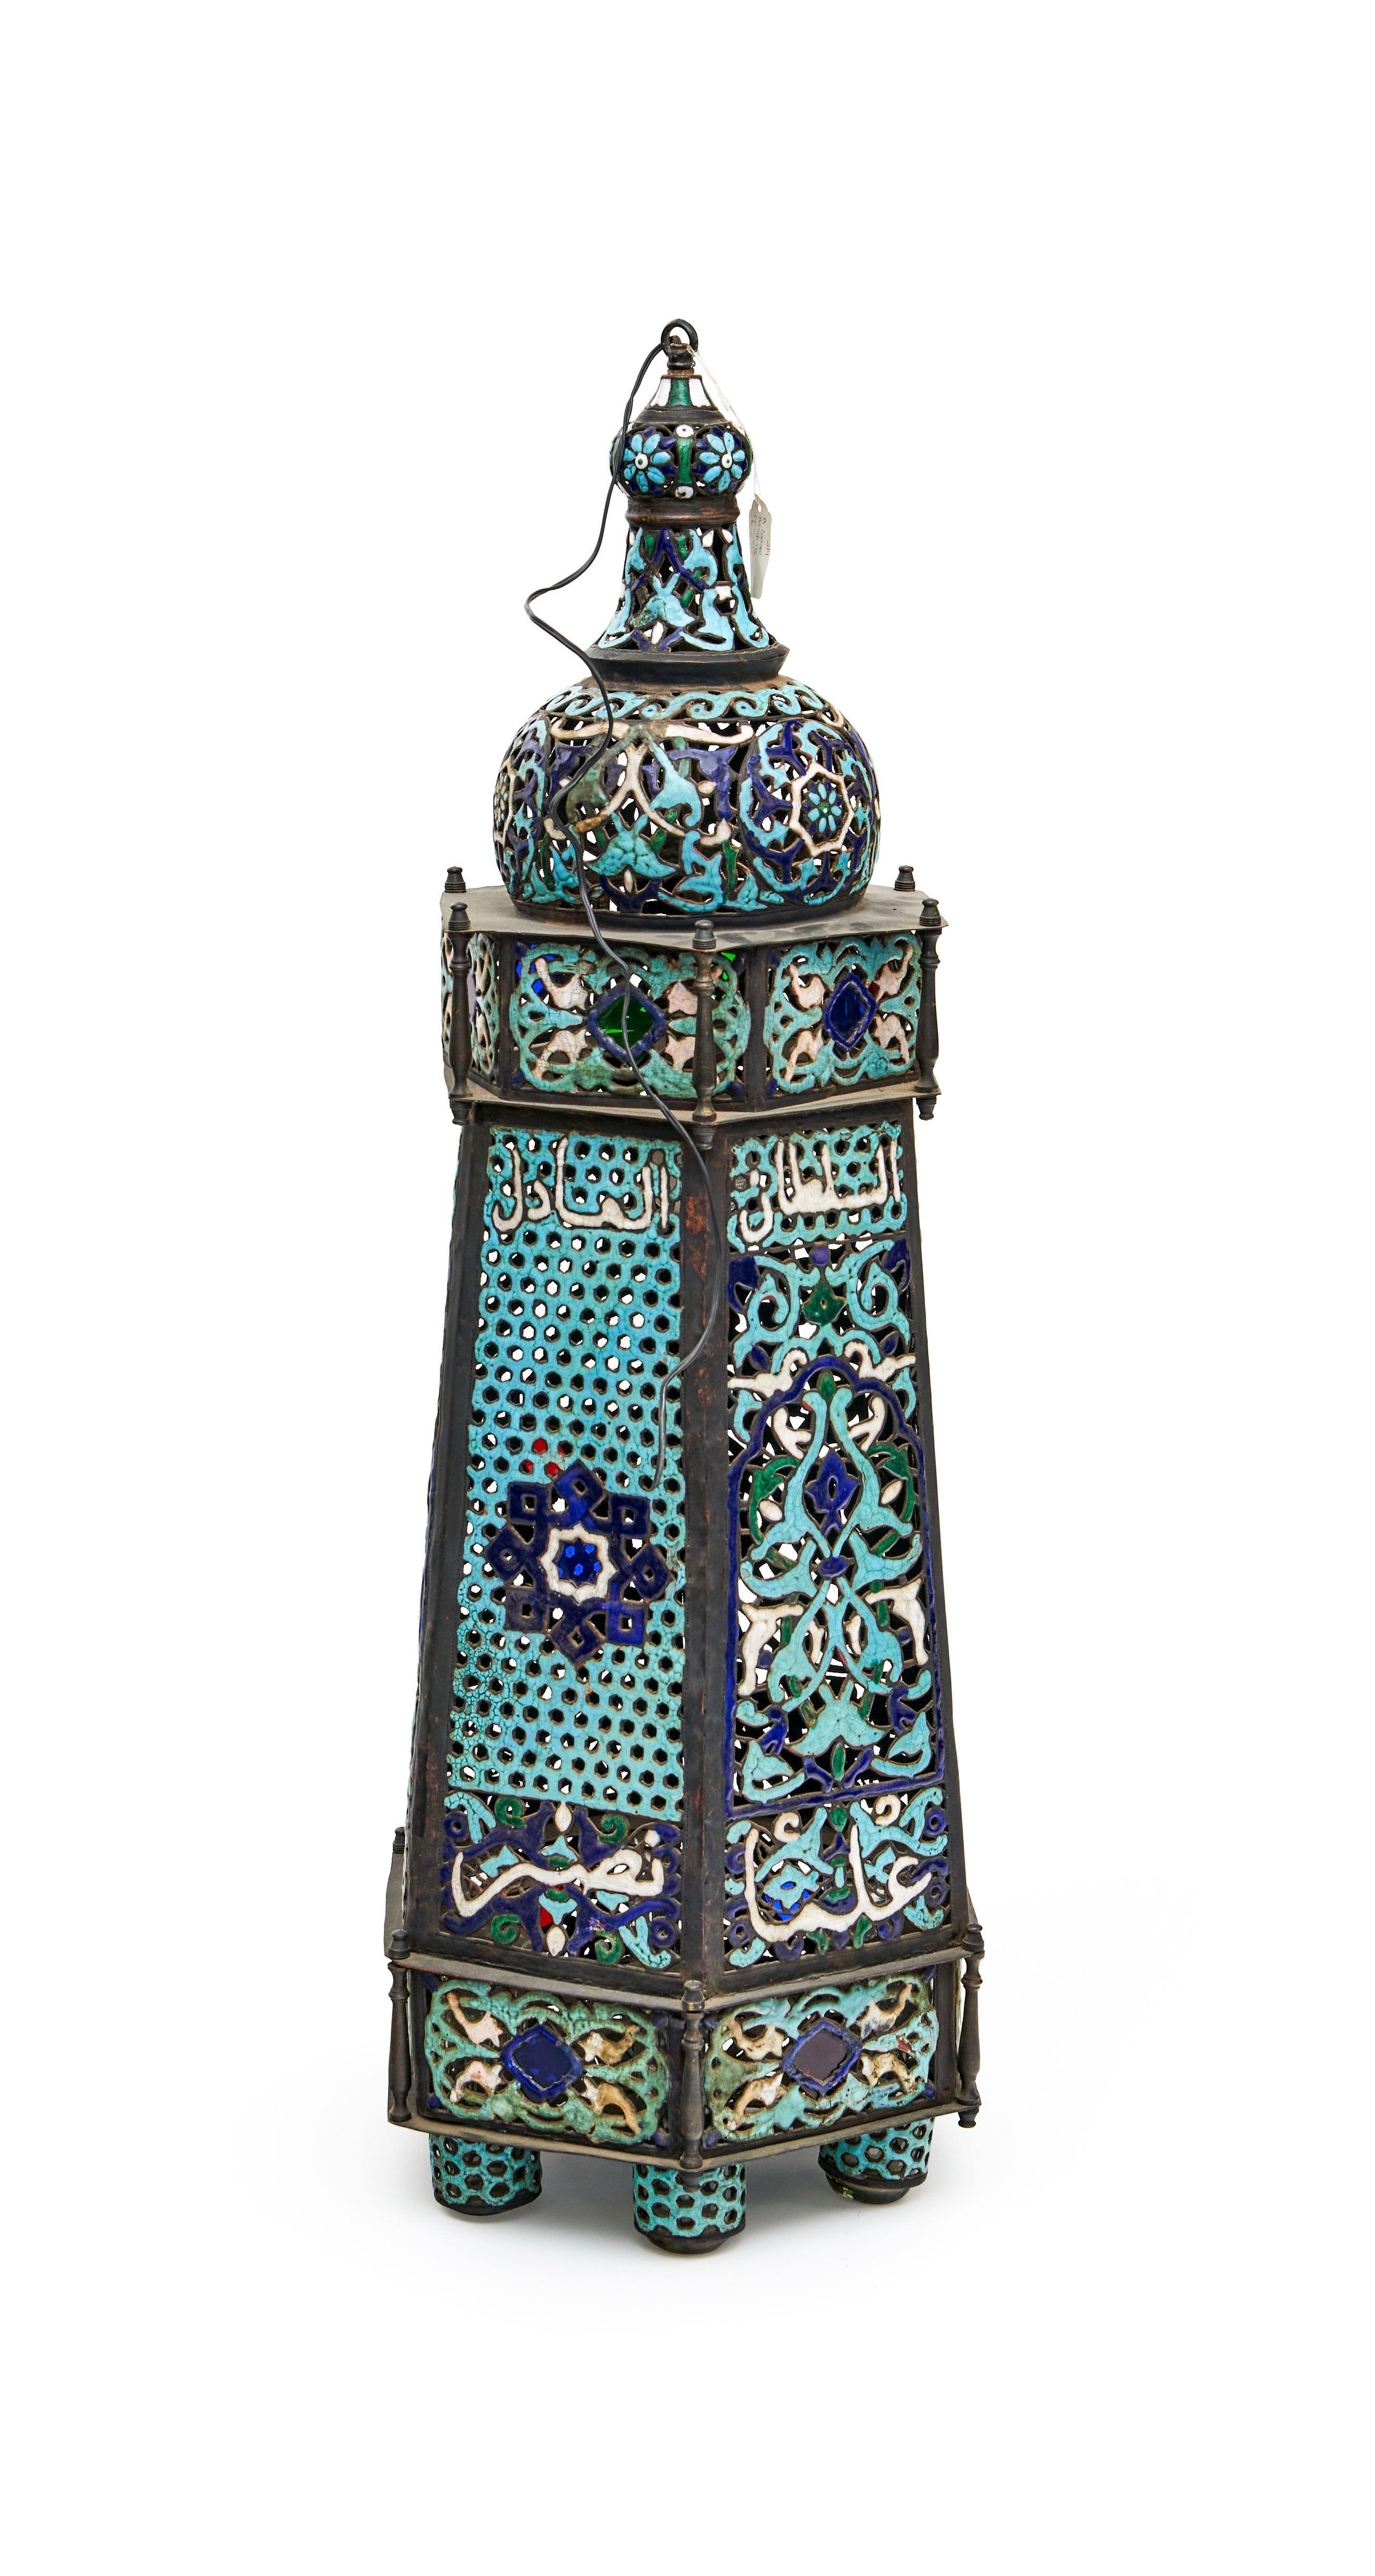 Magnificent mosque lamp made of copper, adorned with exquisite turquoise enamel. This resplendent creation featured six delicate glass candle holders suspended beneath it. The lamp was further enhanced by the inclusion of inscriptions of prayers and